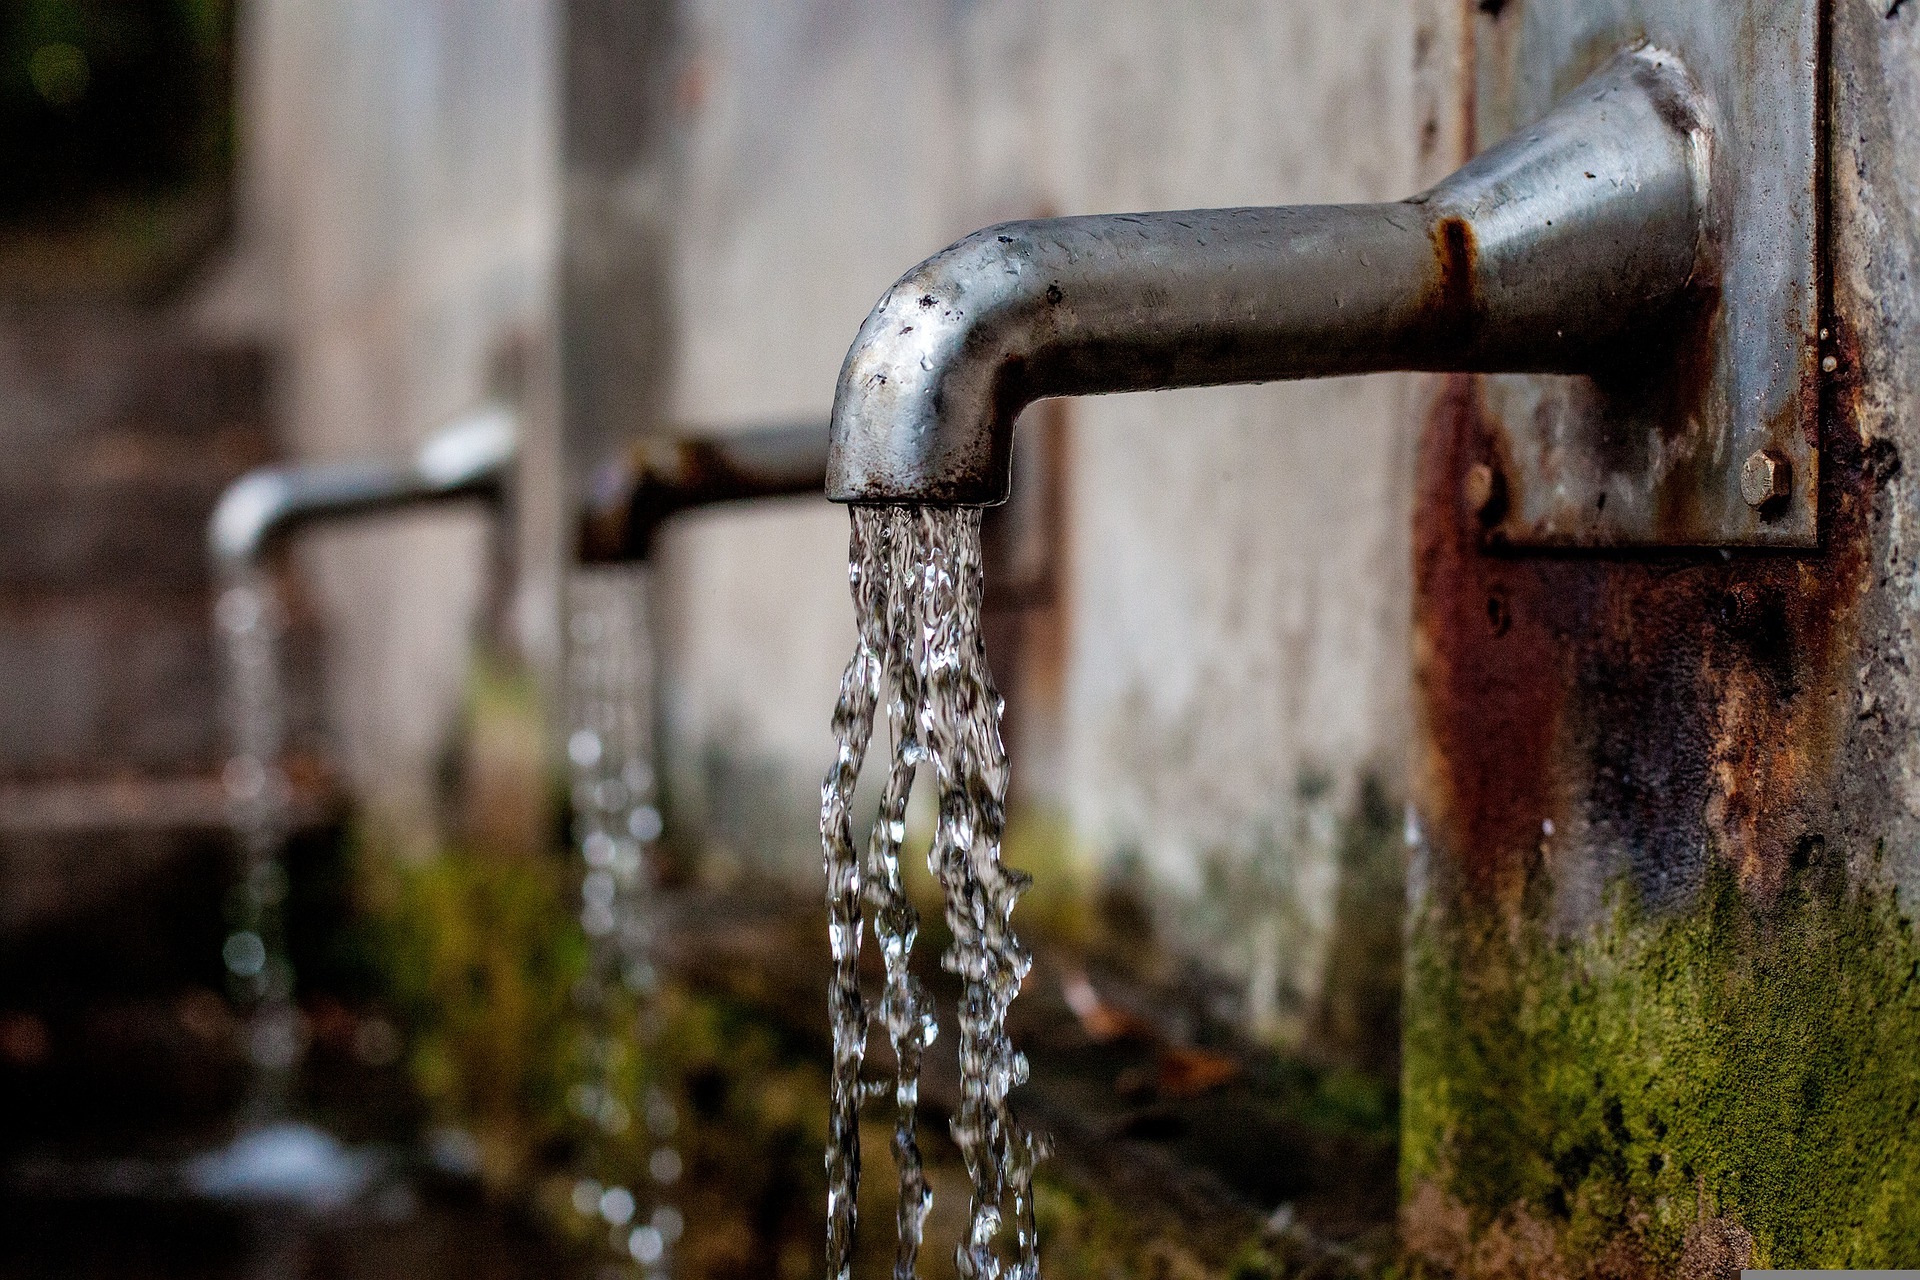  10 NGOs Providing Clean Water and Access to Sanitation Across The Country 